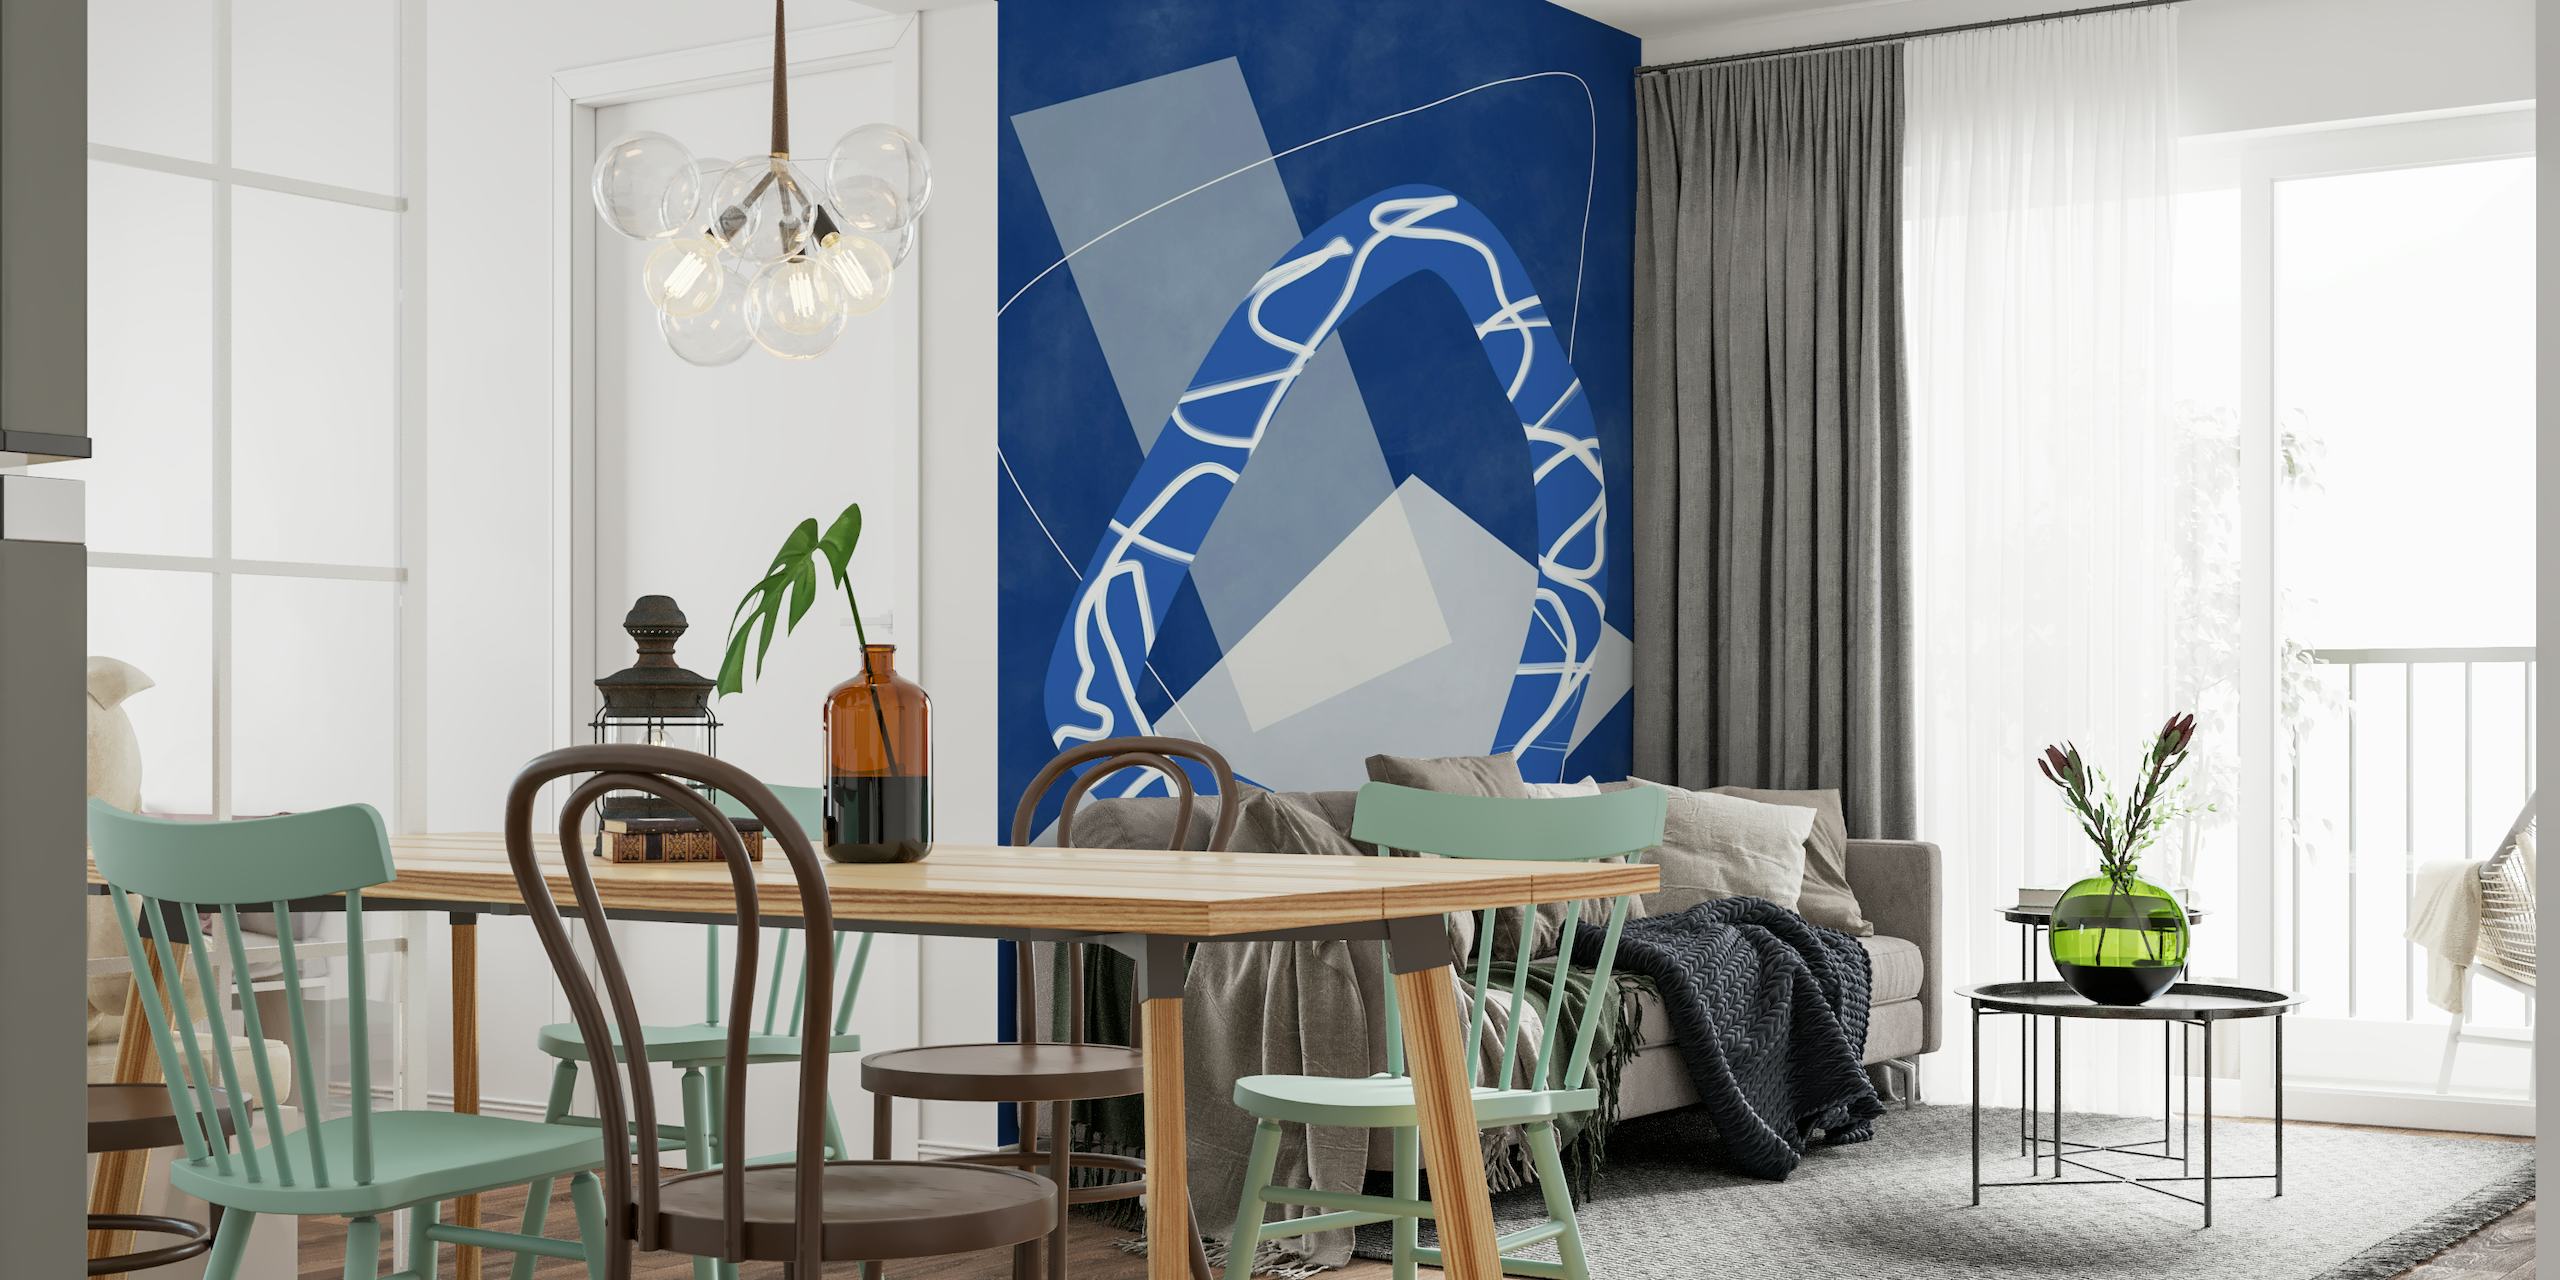 Indigo abstract geometric shapes wall mural with flowing lines